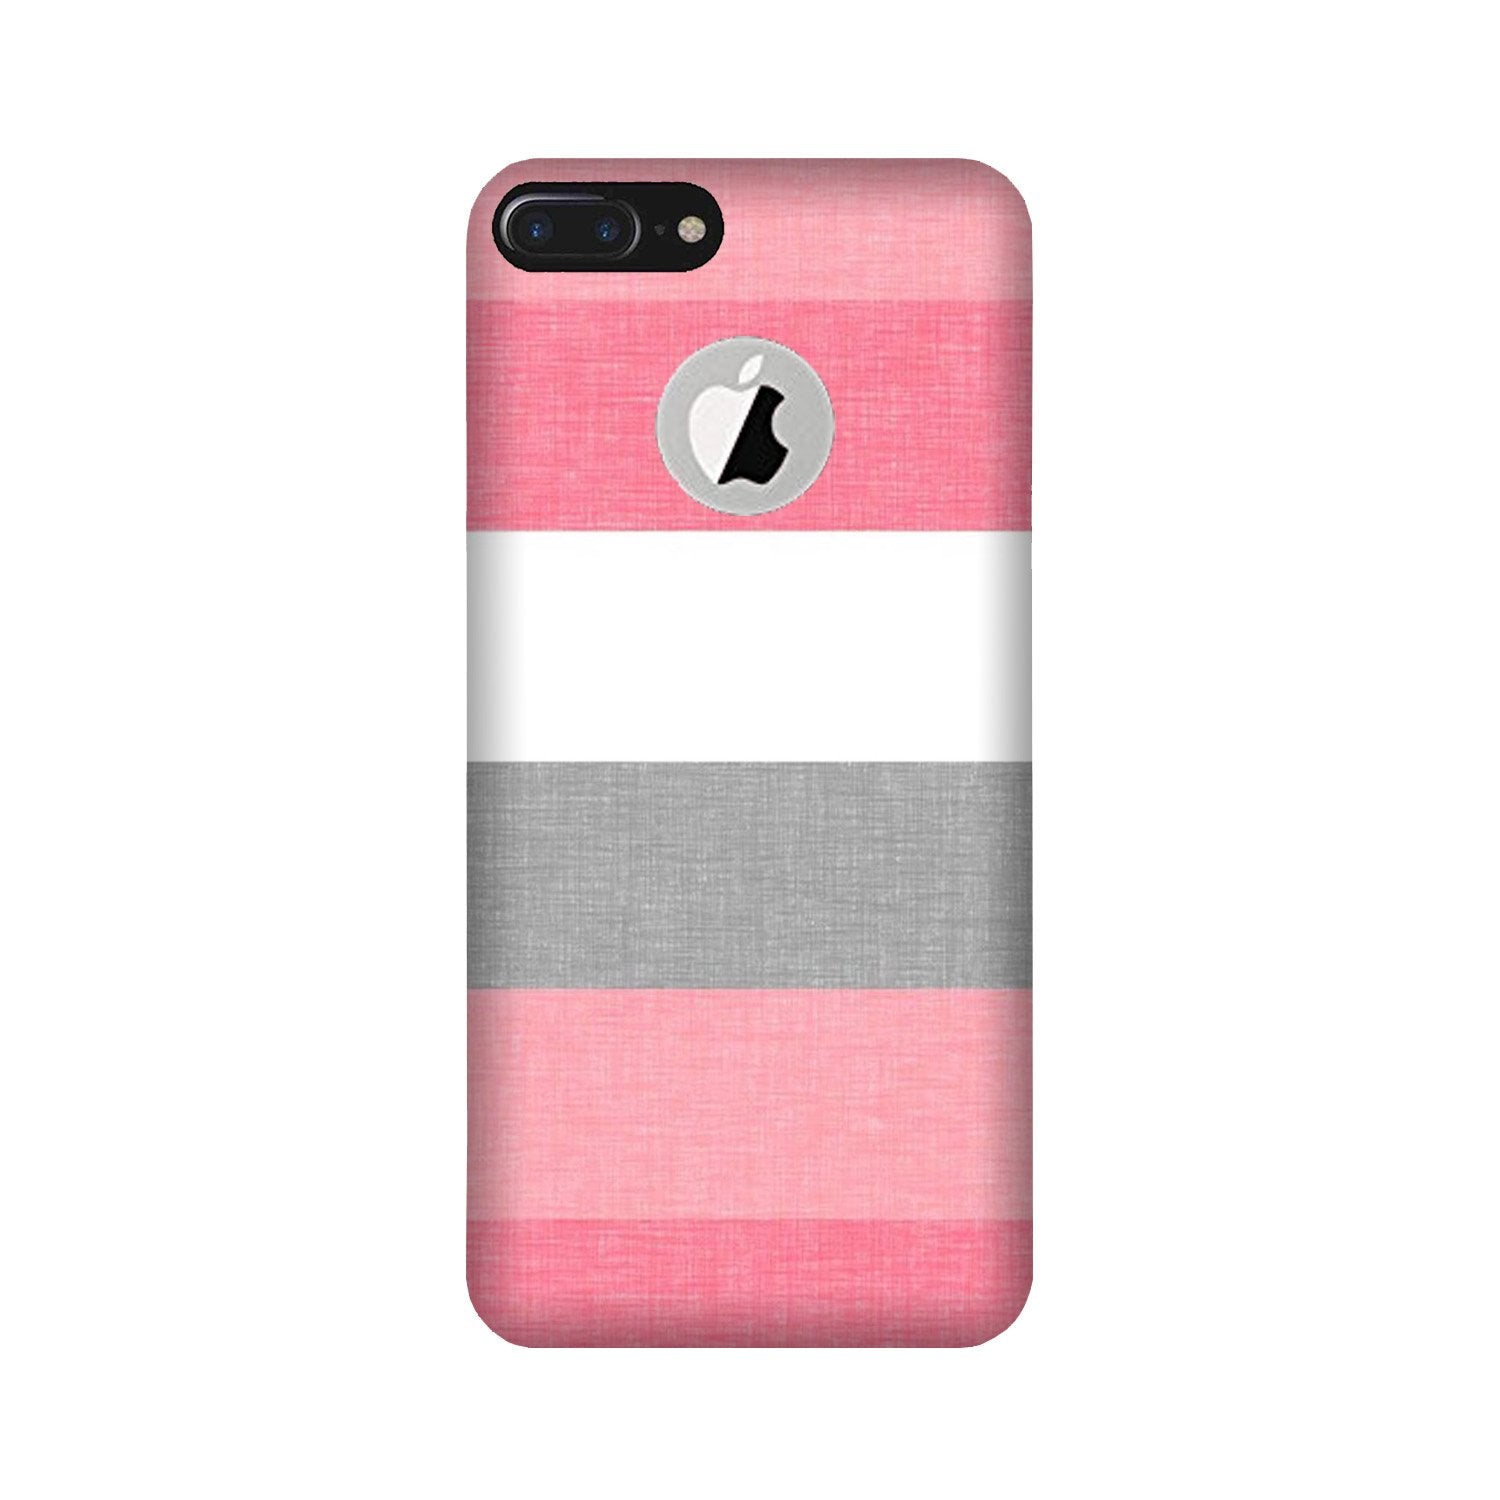 Pink white pattern Case for iPhone 7 Plus logo cut